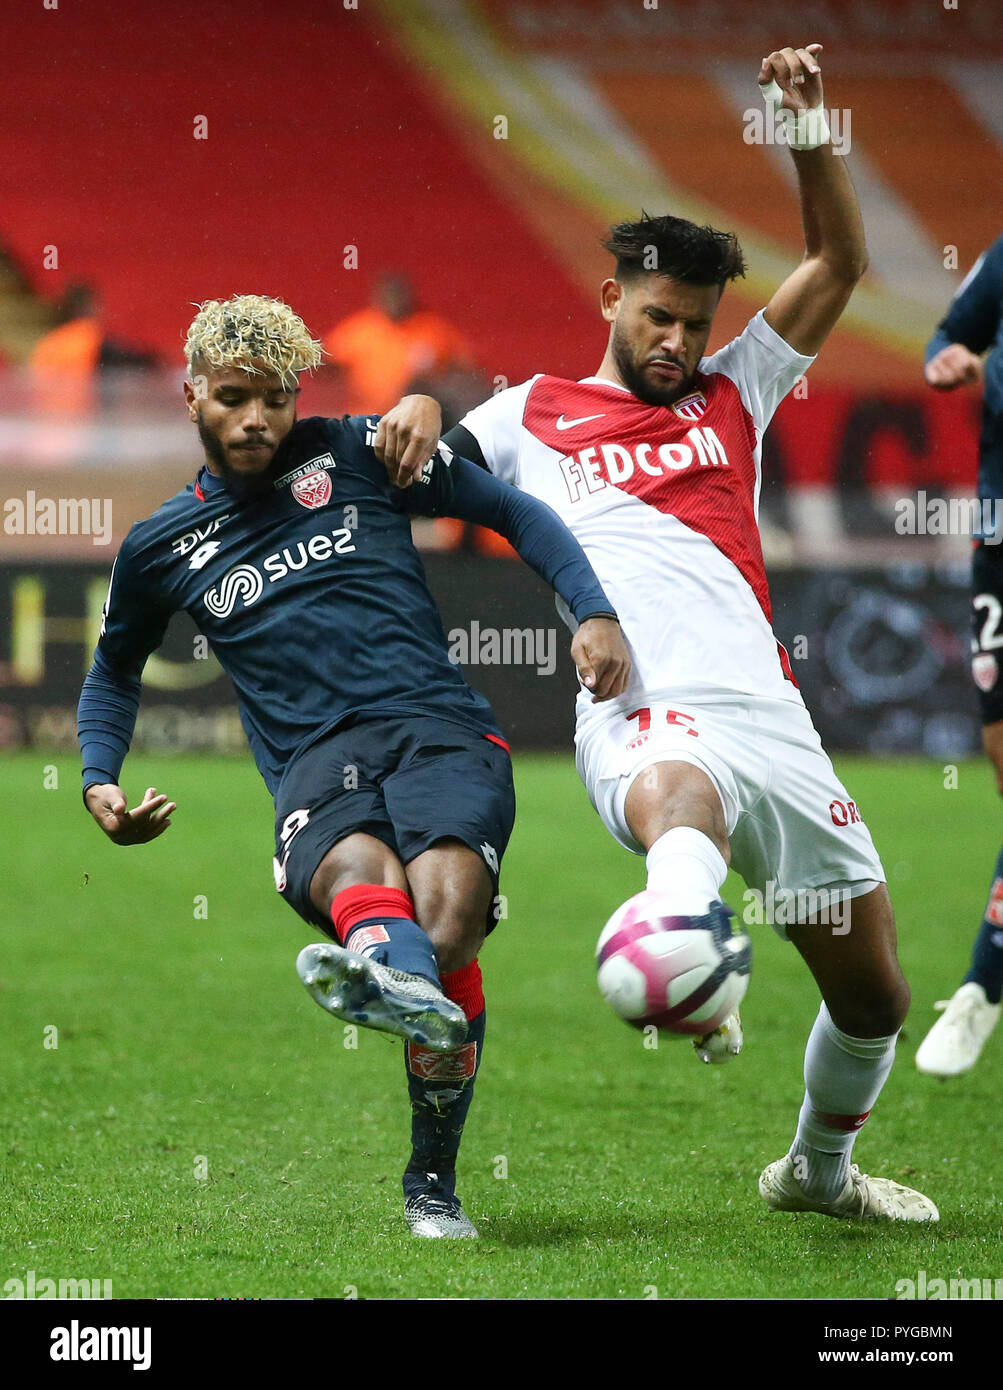 Fontvieille, Monaco. 27th Oct, 2018. Youssef Ait Bennasser (R) of Monaco  vies with Valentin Rosier of Dijon during the 2018-2019 French Ligue 1  match between Monaco and Dijon in Fontvieille, Monaco, Oct.